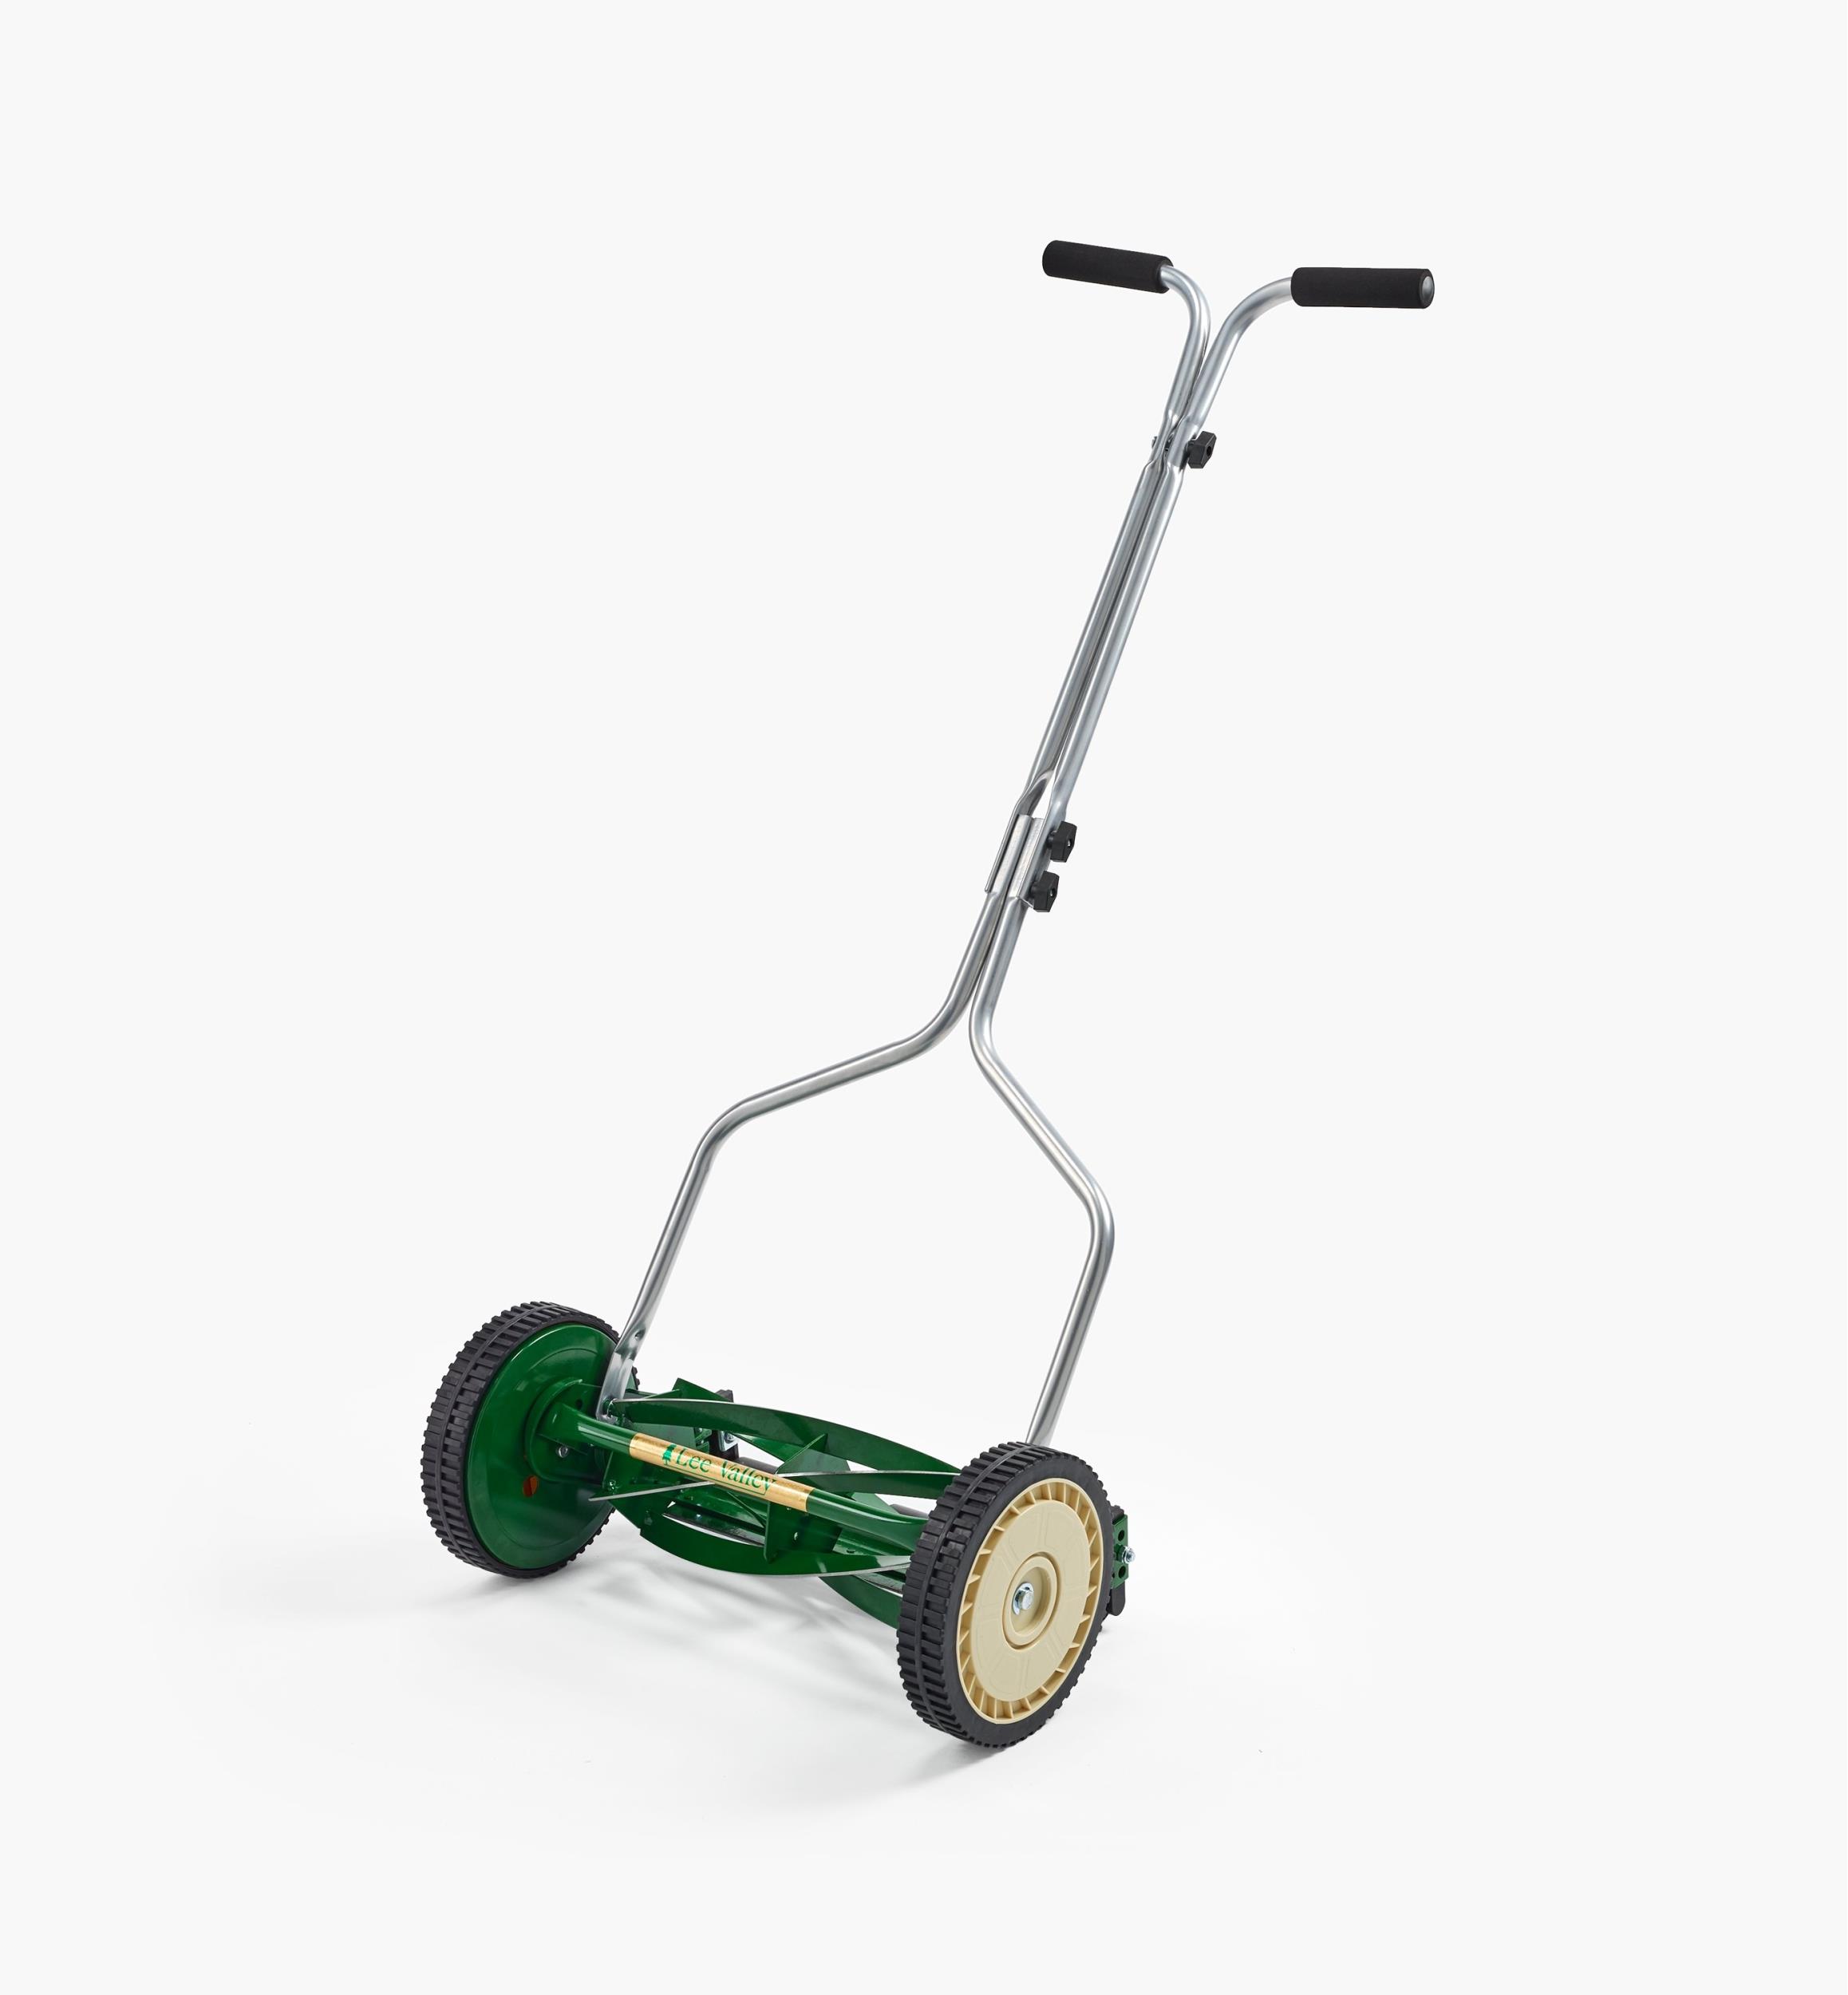 https://assets.leevalley.com/Size5/10026/PA812-lee-valley-14-inch-mower-f-34.jpg